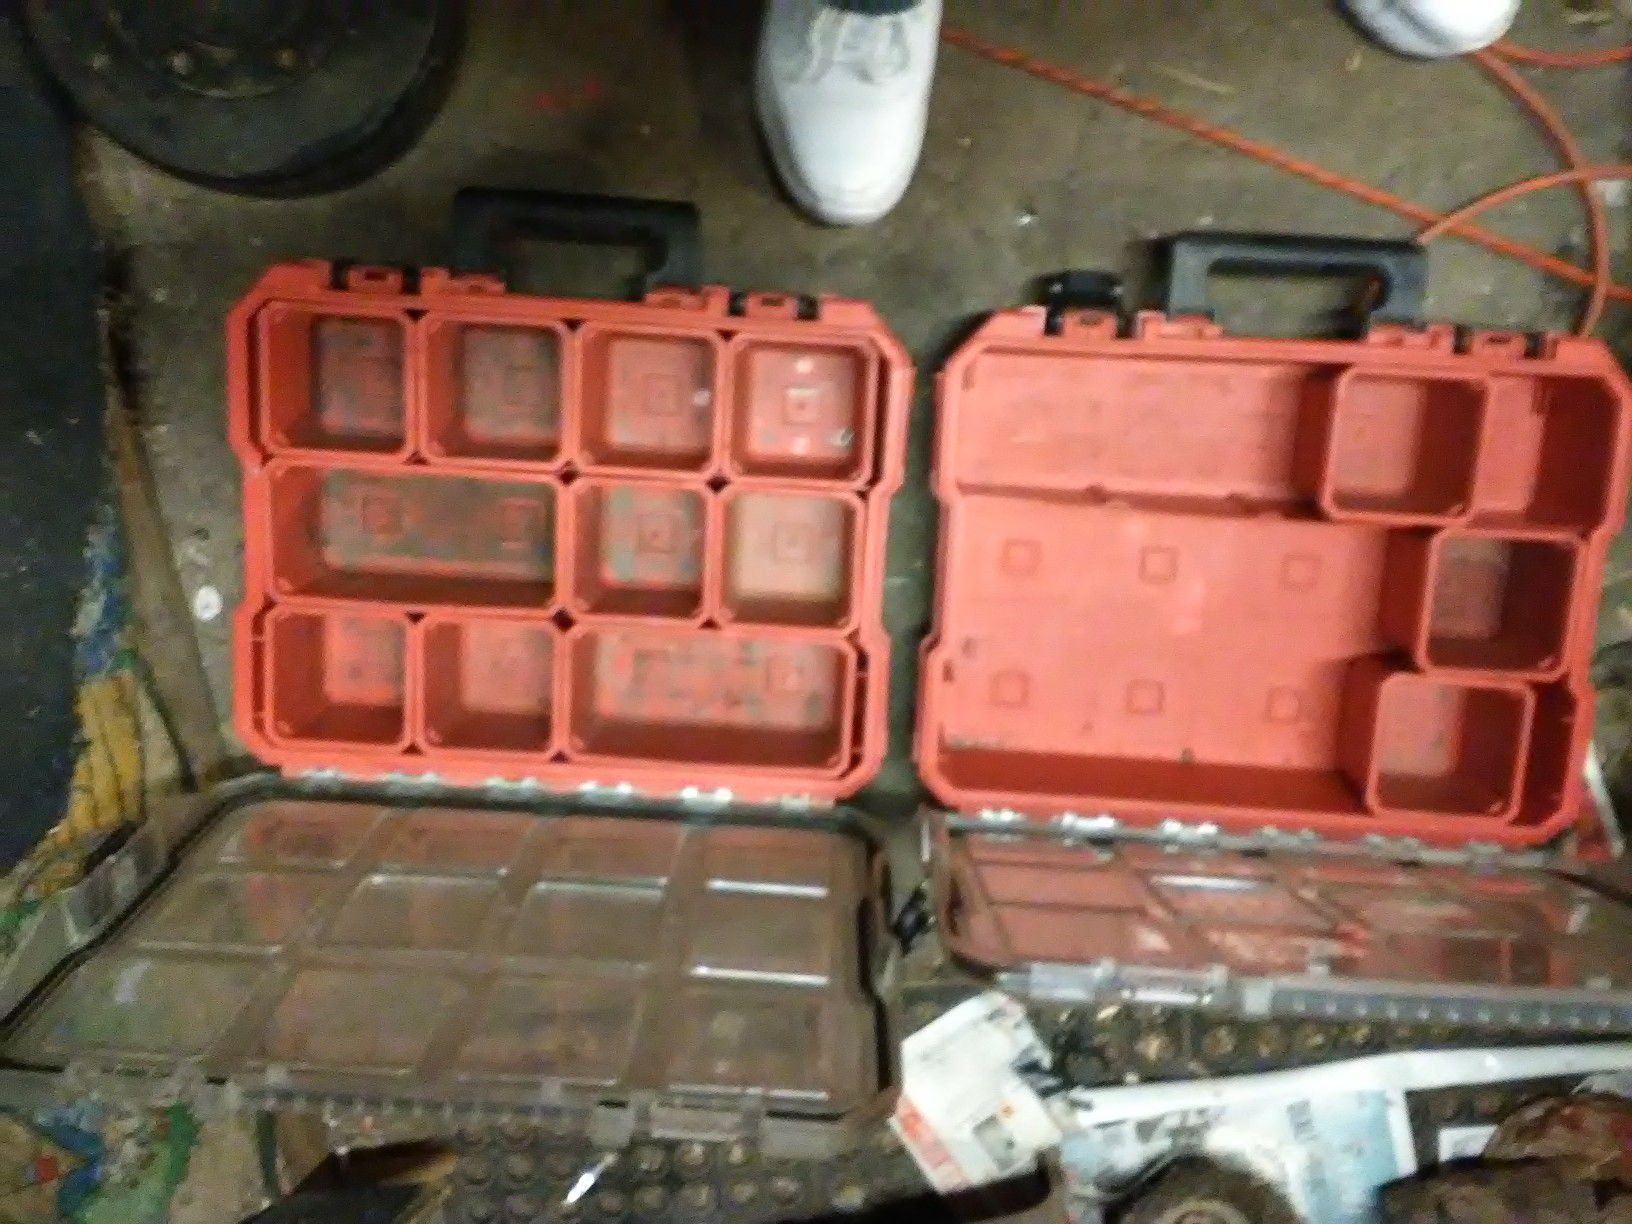 Storage containers